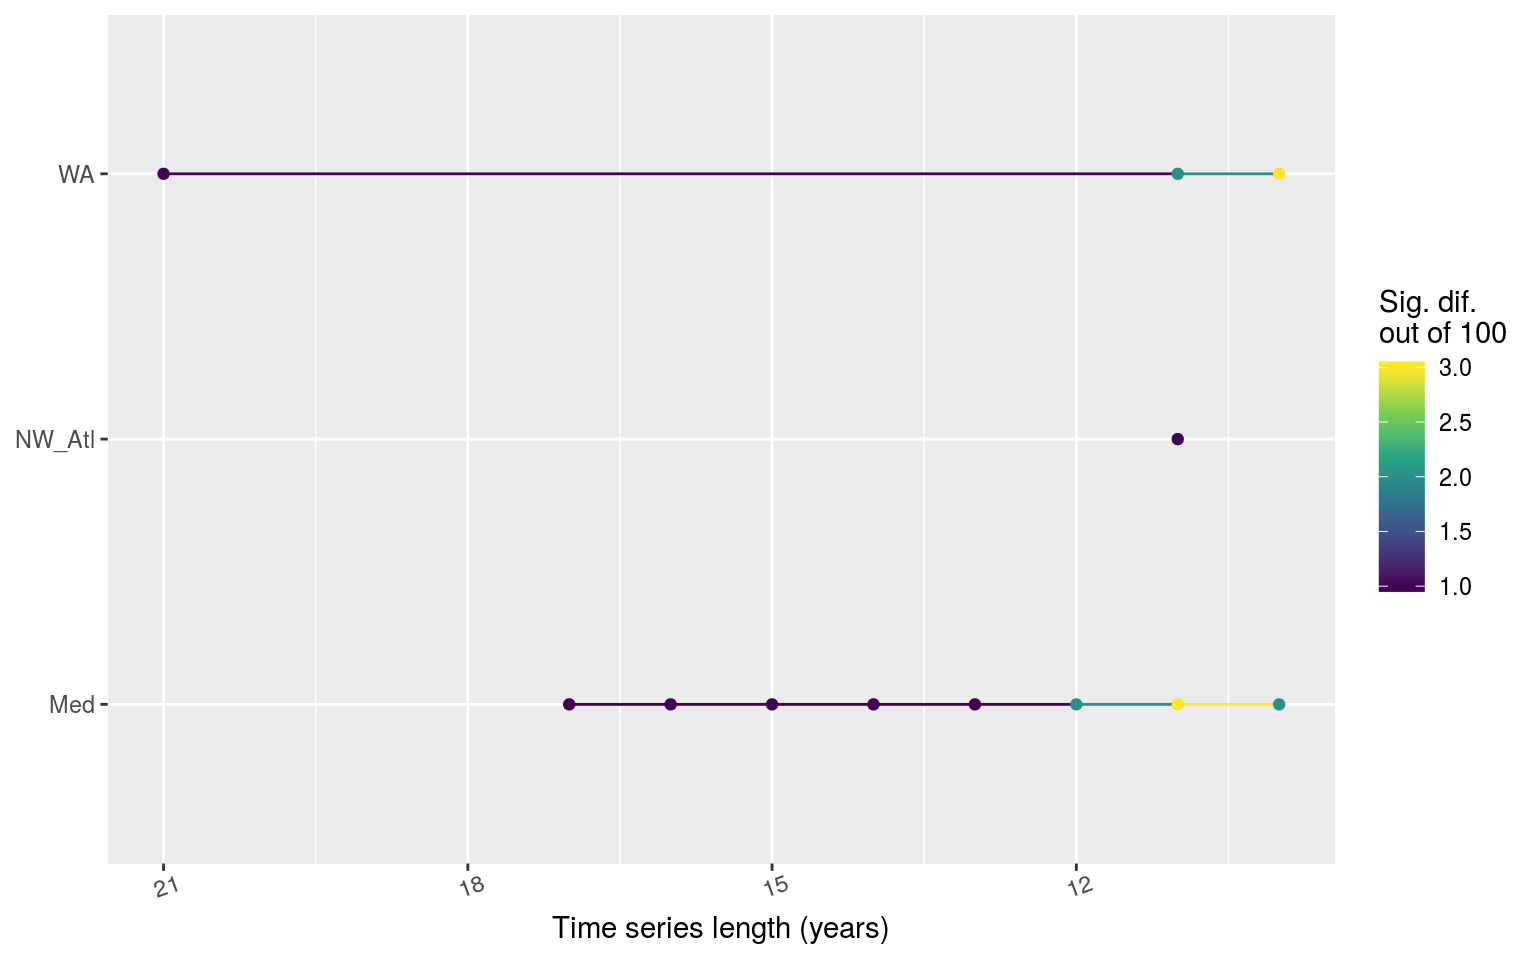 Line graph showing the count of times out of 100 random replicates when a given time series length led to significant differences in the count of categories of MHWs as determined by a _chi_-squared test.